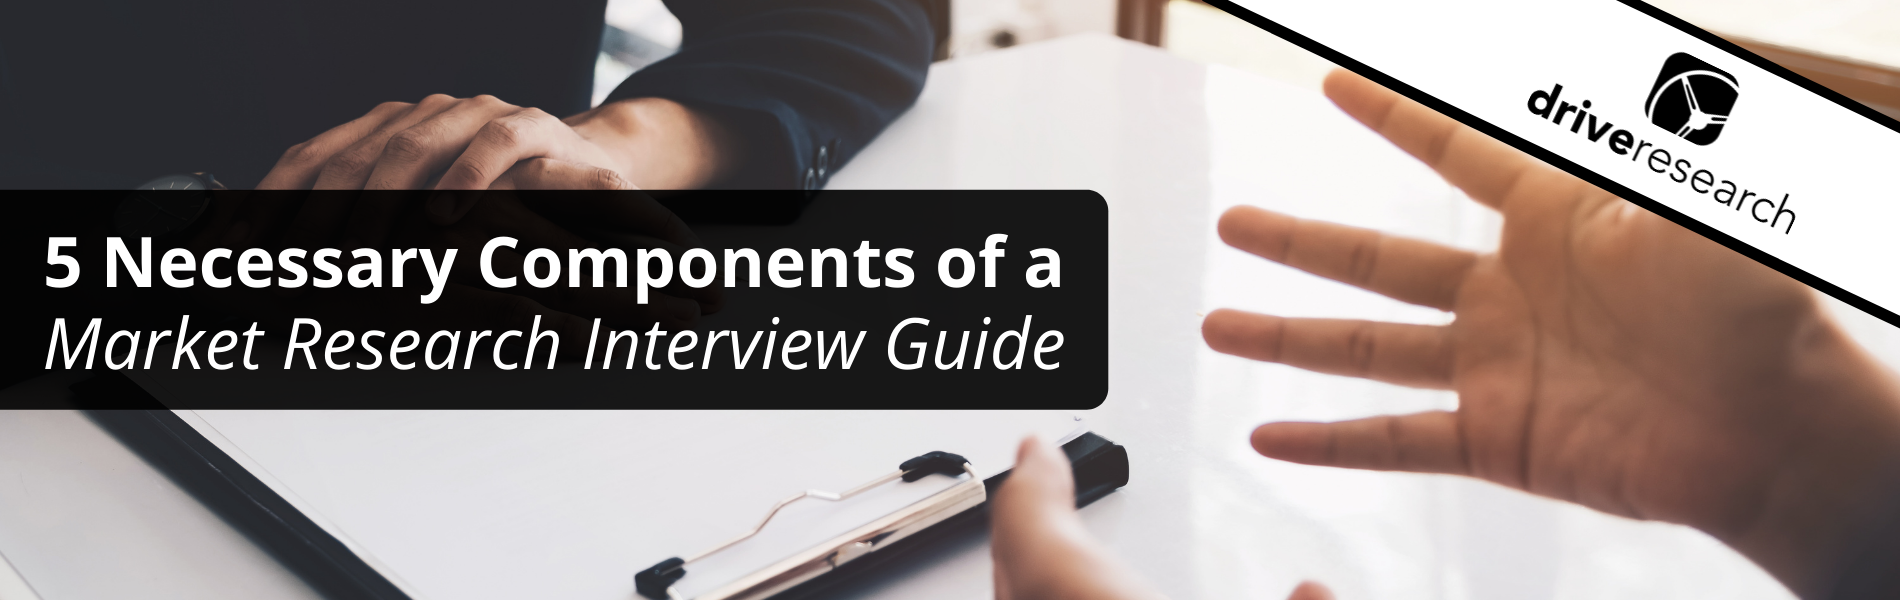 market research interview guide